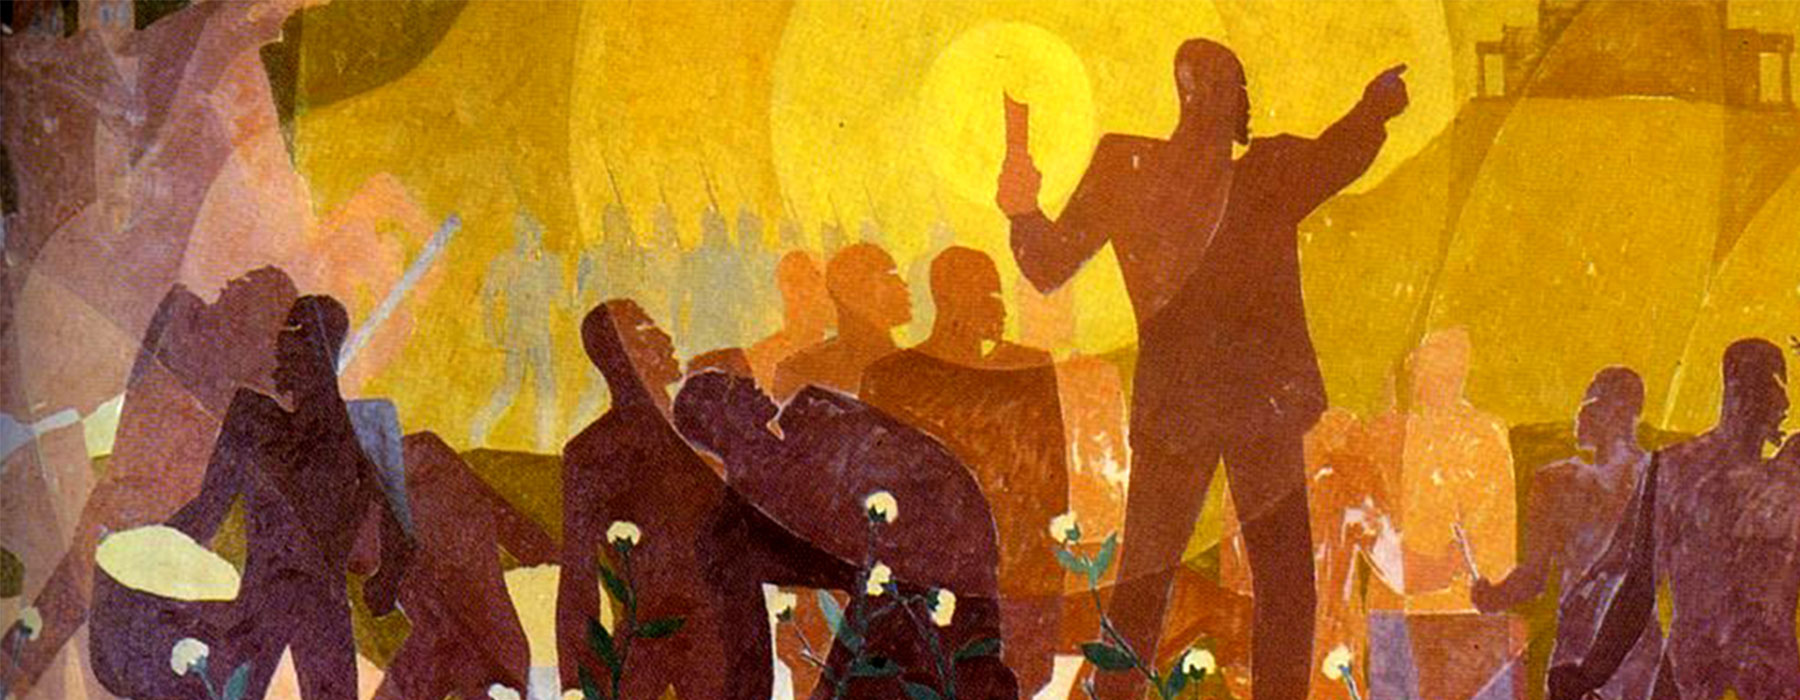 mural painting from 1934 titled "From Slavery to Reconstruction"